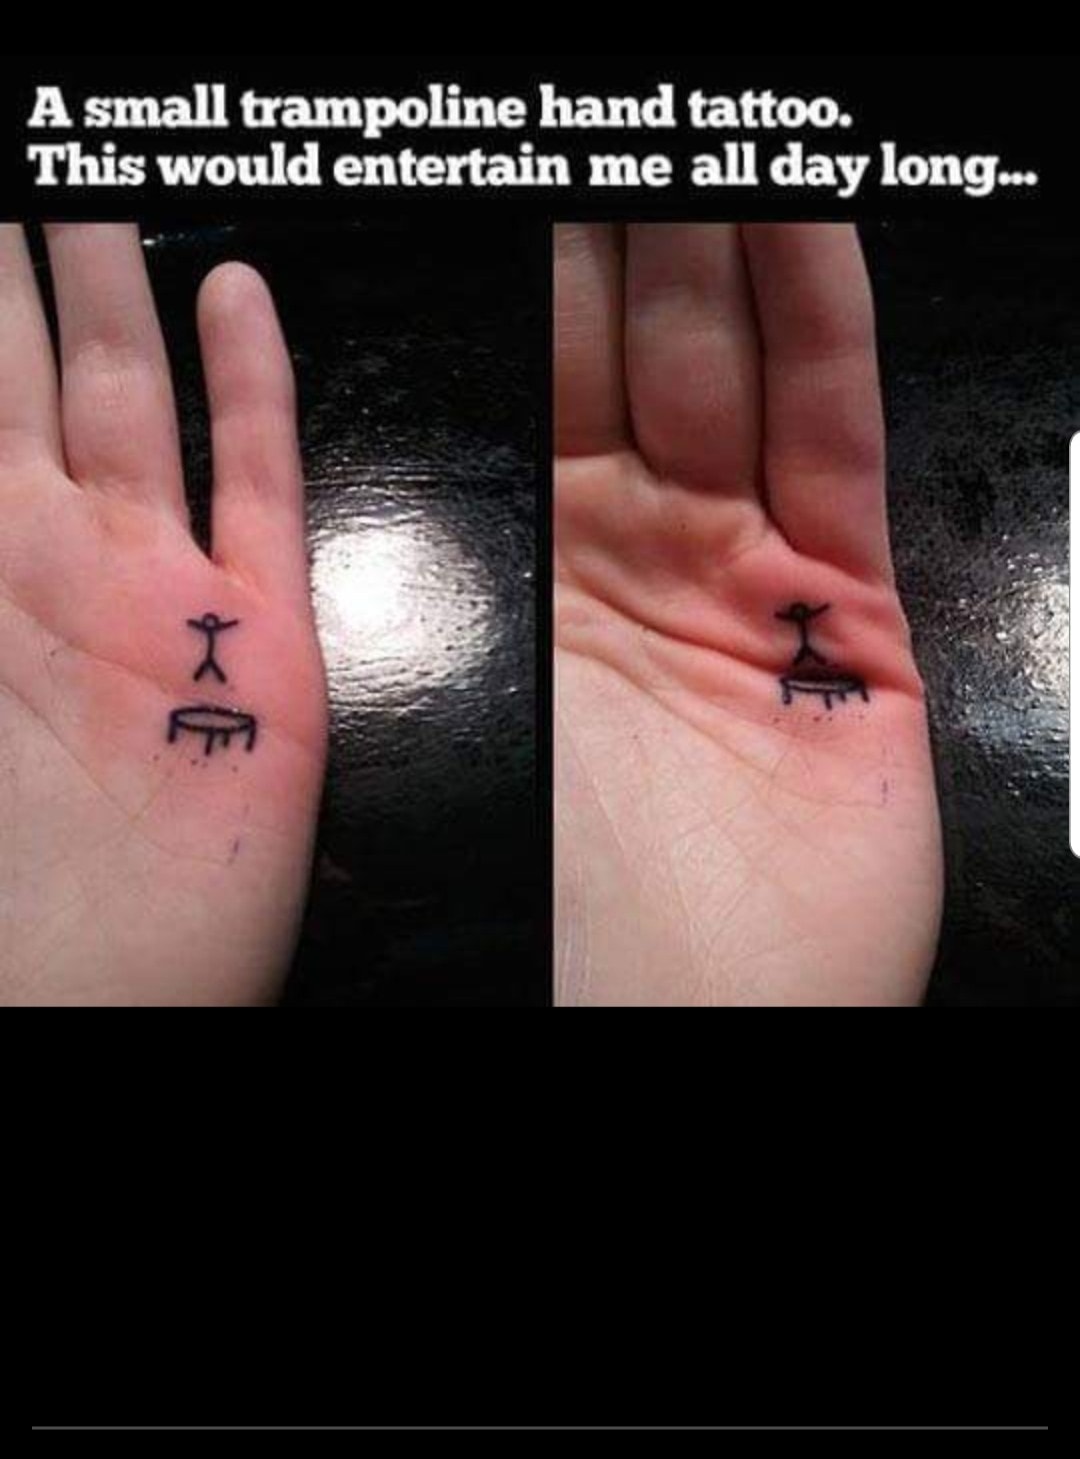 trampolin tattoo hand - A small trampoline hand tattoo. This would entertain me all day long...